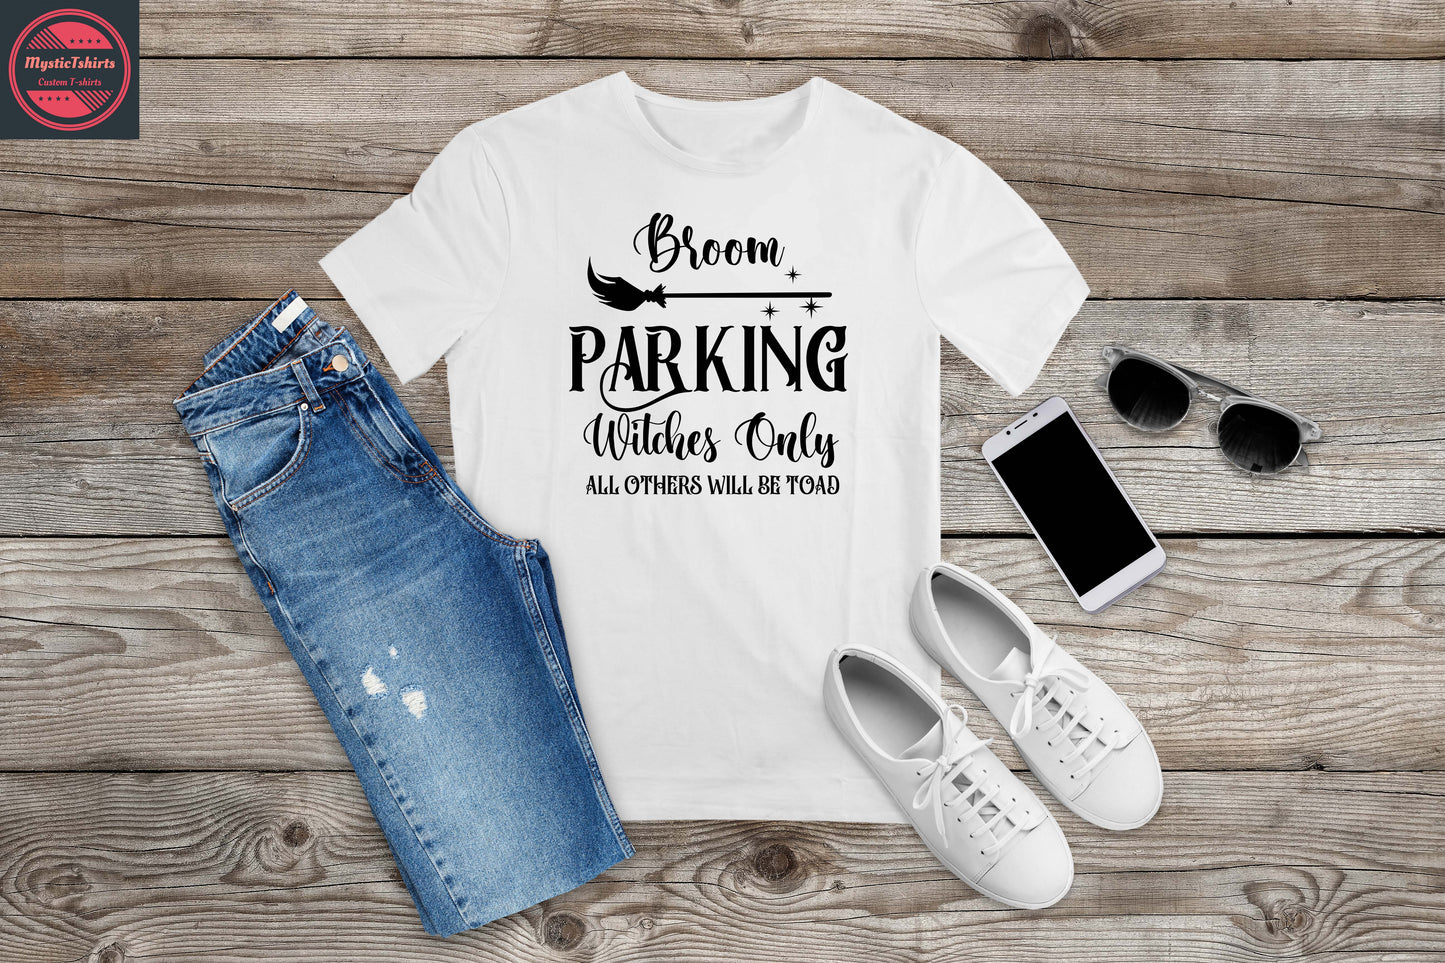 036. BROOM PARKING WITCHES ONLY ALL OTHERS WILL BE TOAD, Custom Made Shirt, Personalized T-Shirt, Custom Text, Make Your Own Shirt, Custom Tee